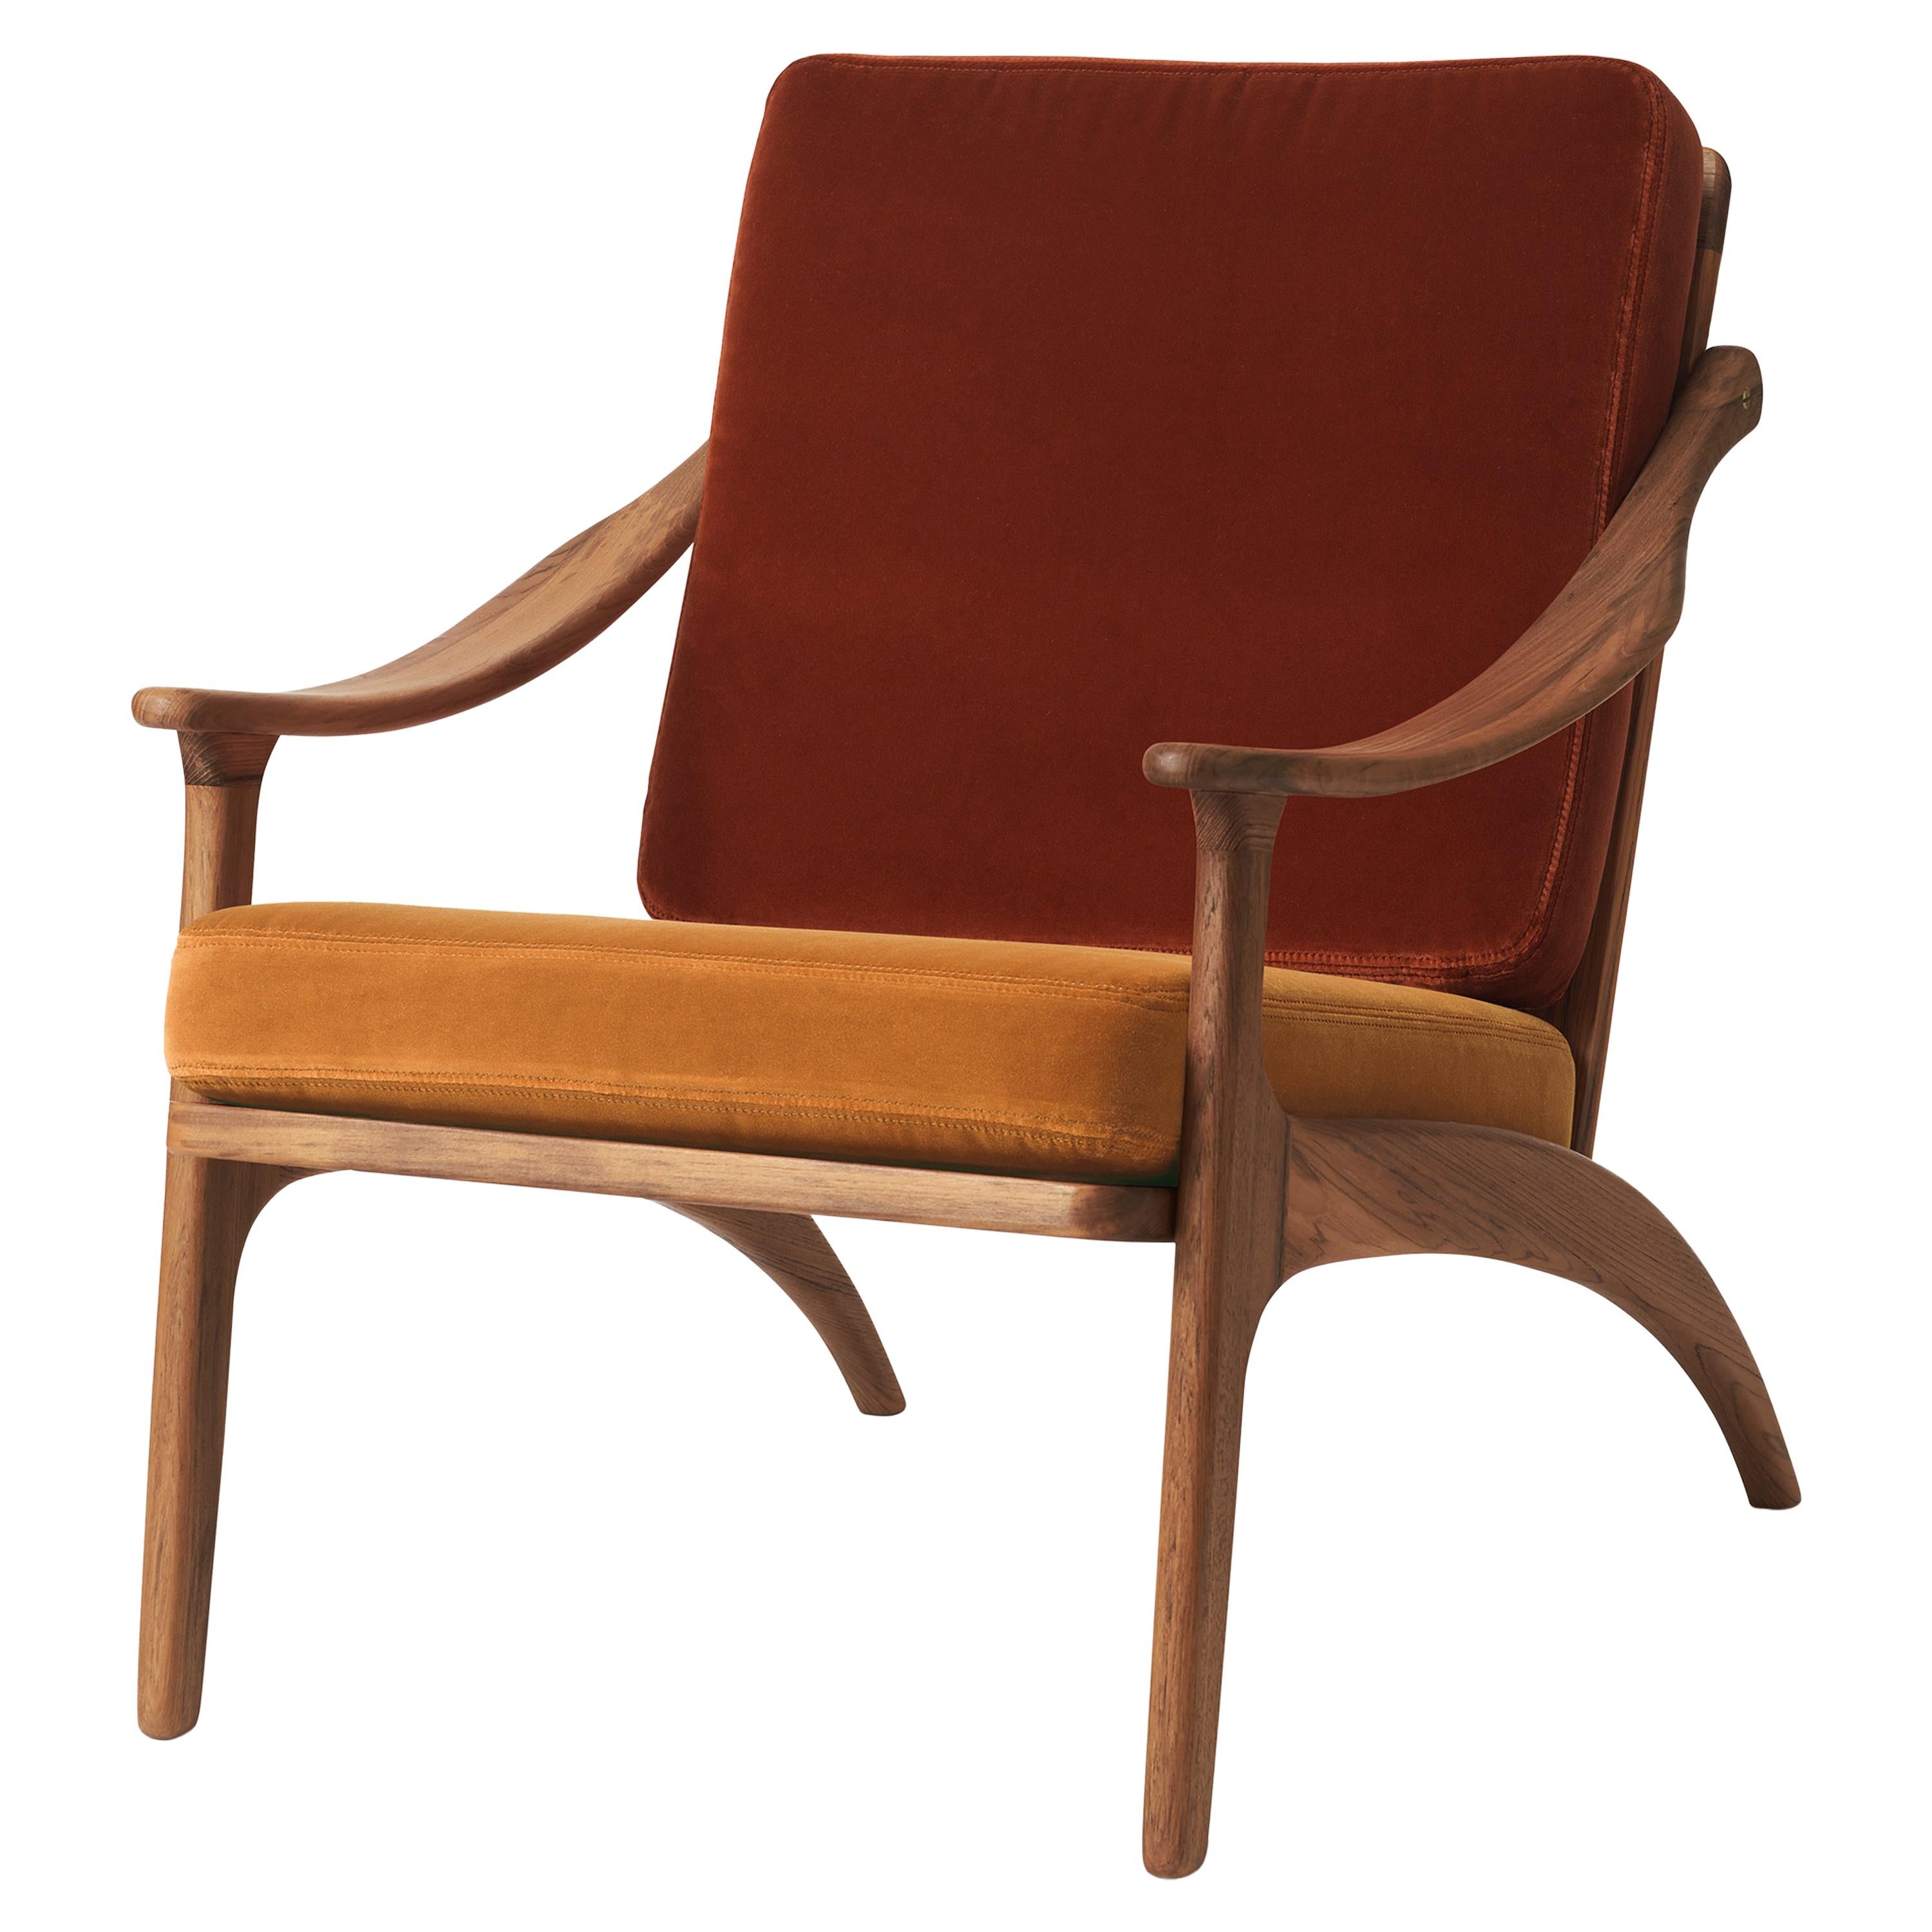 For Sale: Red (Ritz 3701,1688) Lean Back Lounge Two-Tone Chair in Teak, by Arne Hovmand-Olsen from Warm Nordic